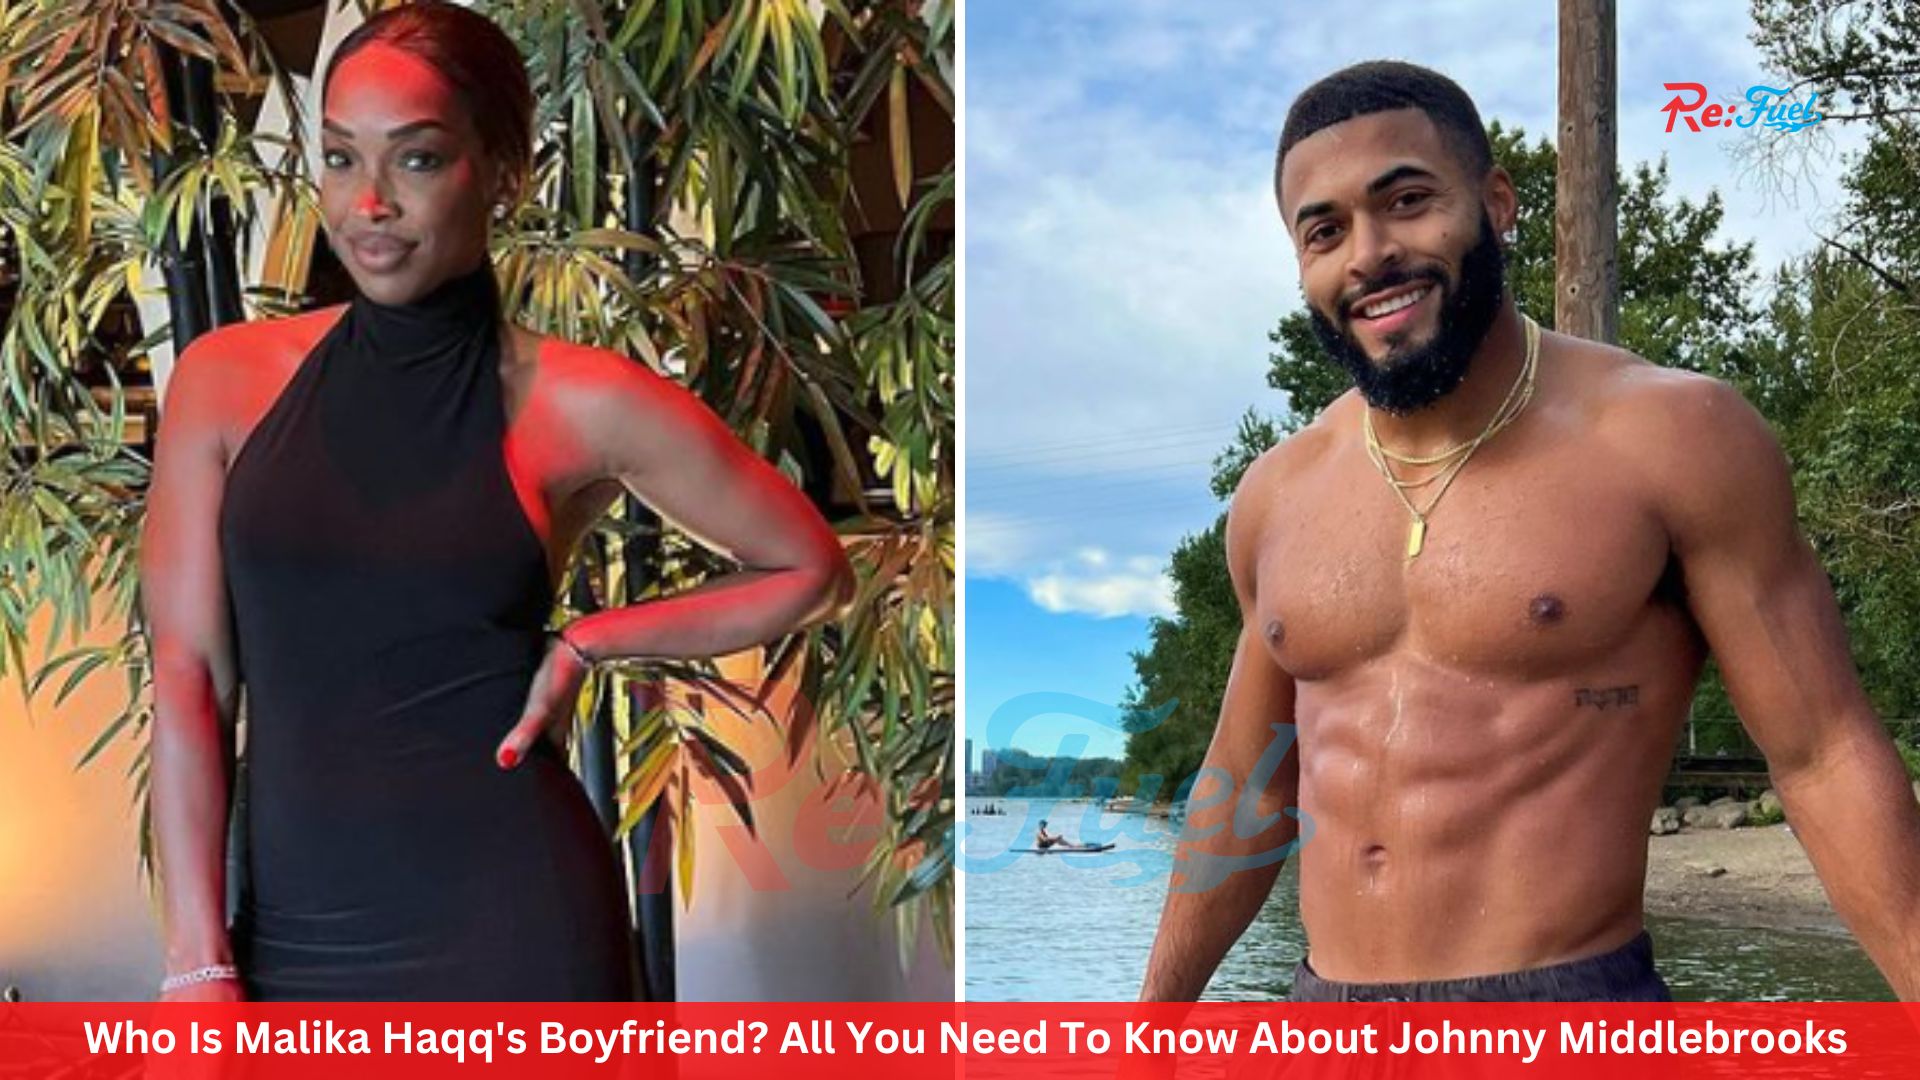 Who Is Malika Haqq's Boyfriend? All You Need To Know About Johnny Middlebrooks